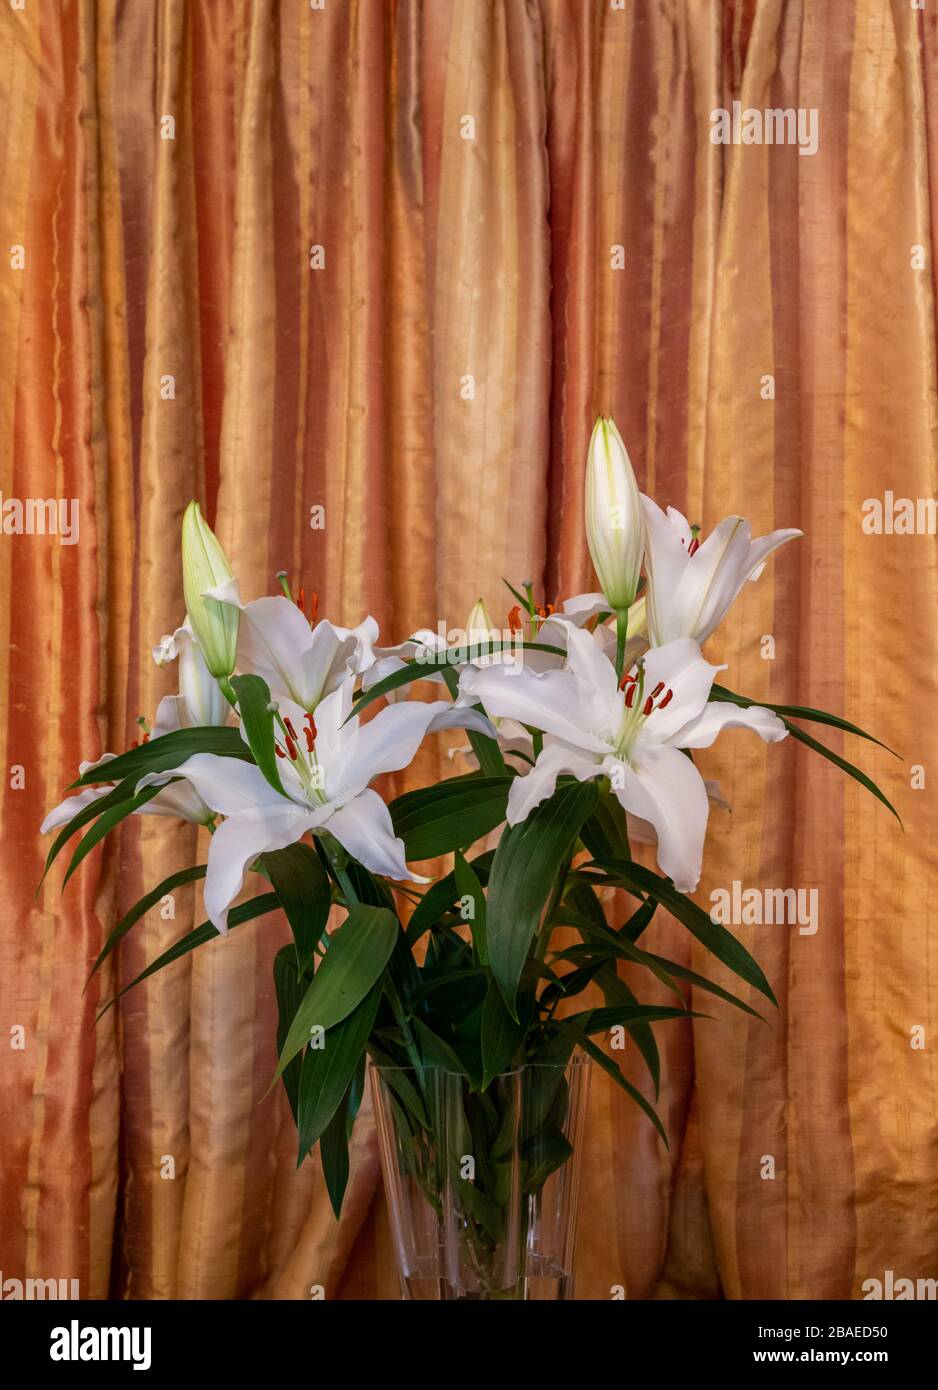 Still life photo of interior with cut lily flowers in a vase with golden silk curtains as backdrop. Stock Photo